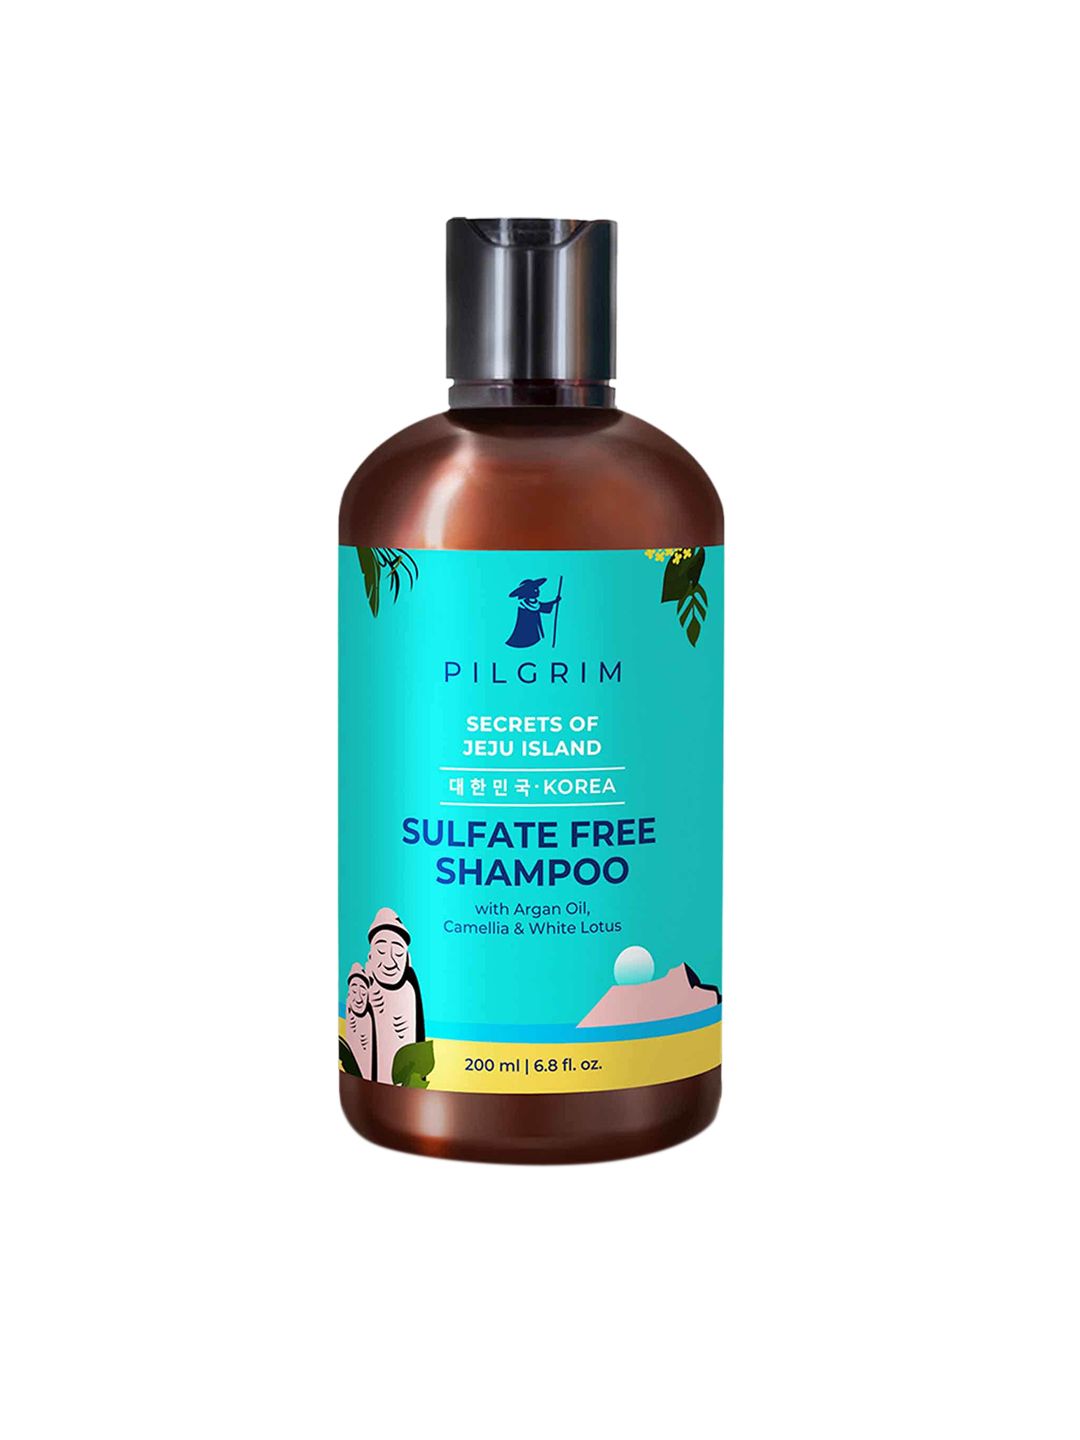 Pilgrim Sulfate Free Shampoo with Argan Oil, Camellia & White Lotus for Dry & Frizzy Hair Price in India